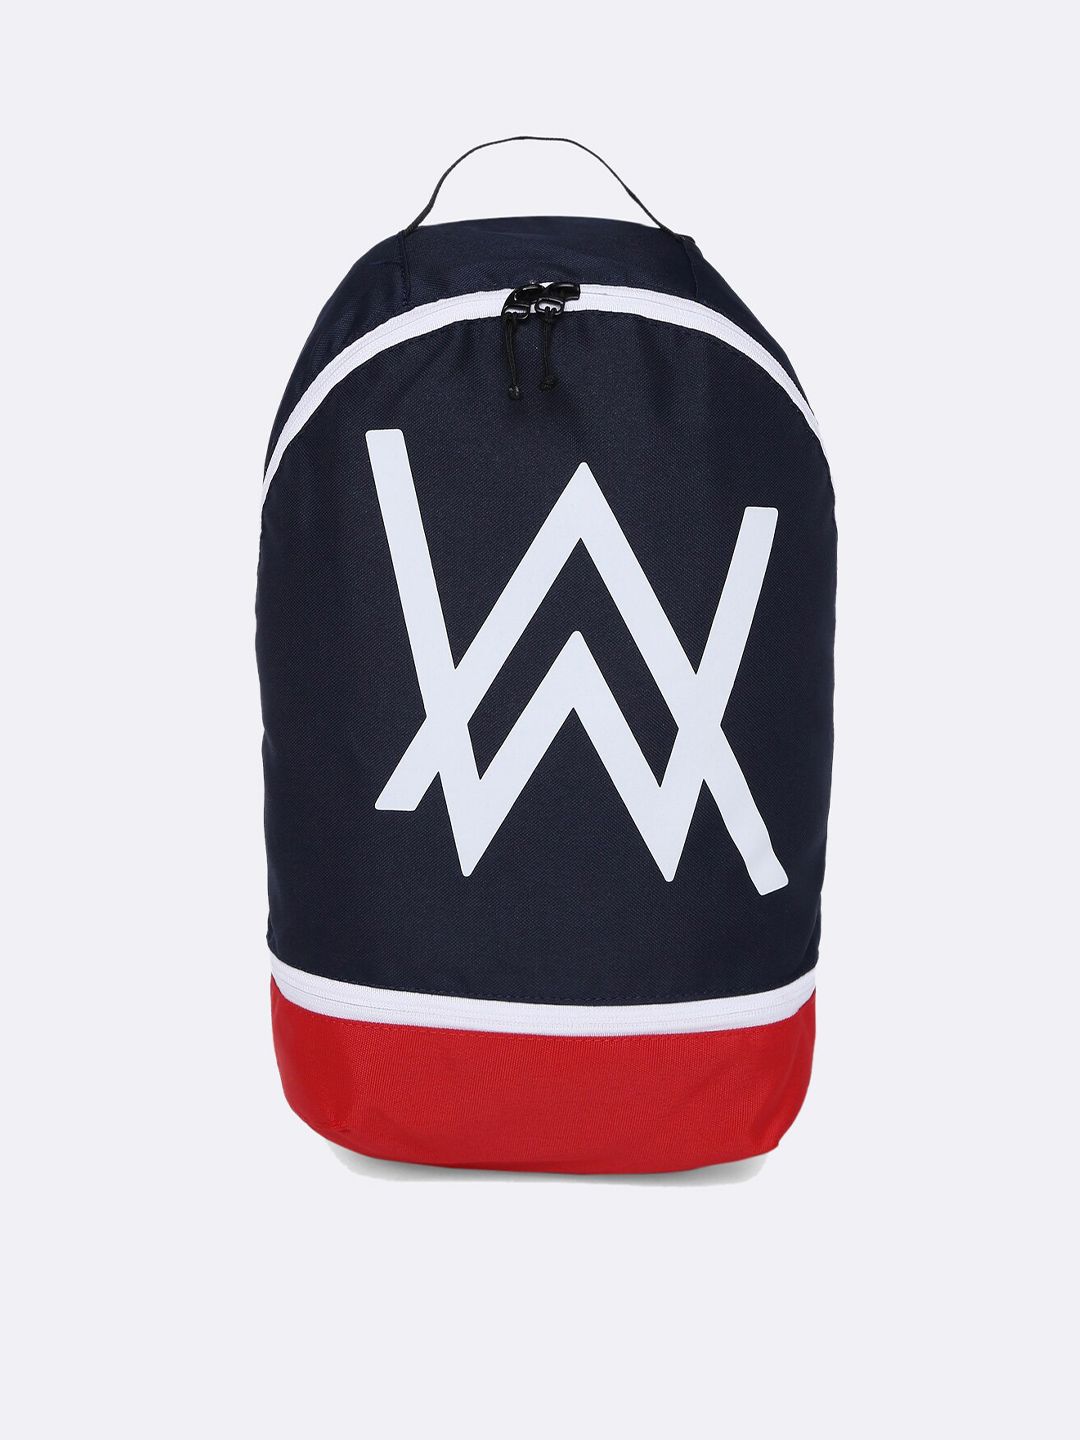 Bewakoof Unisex Blue & Red A.W. Printed Backpack Price in India